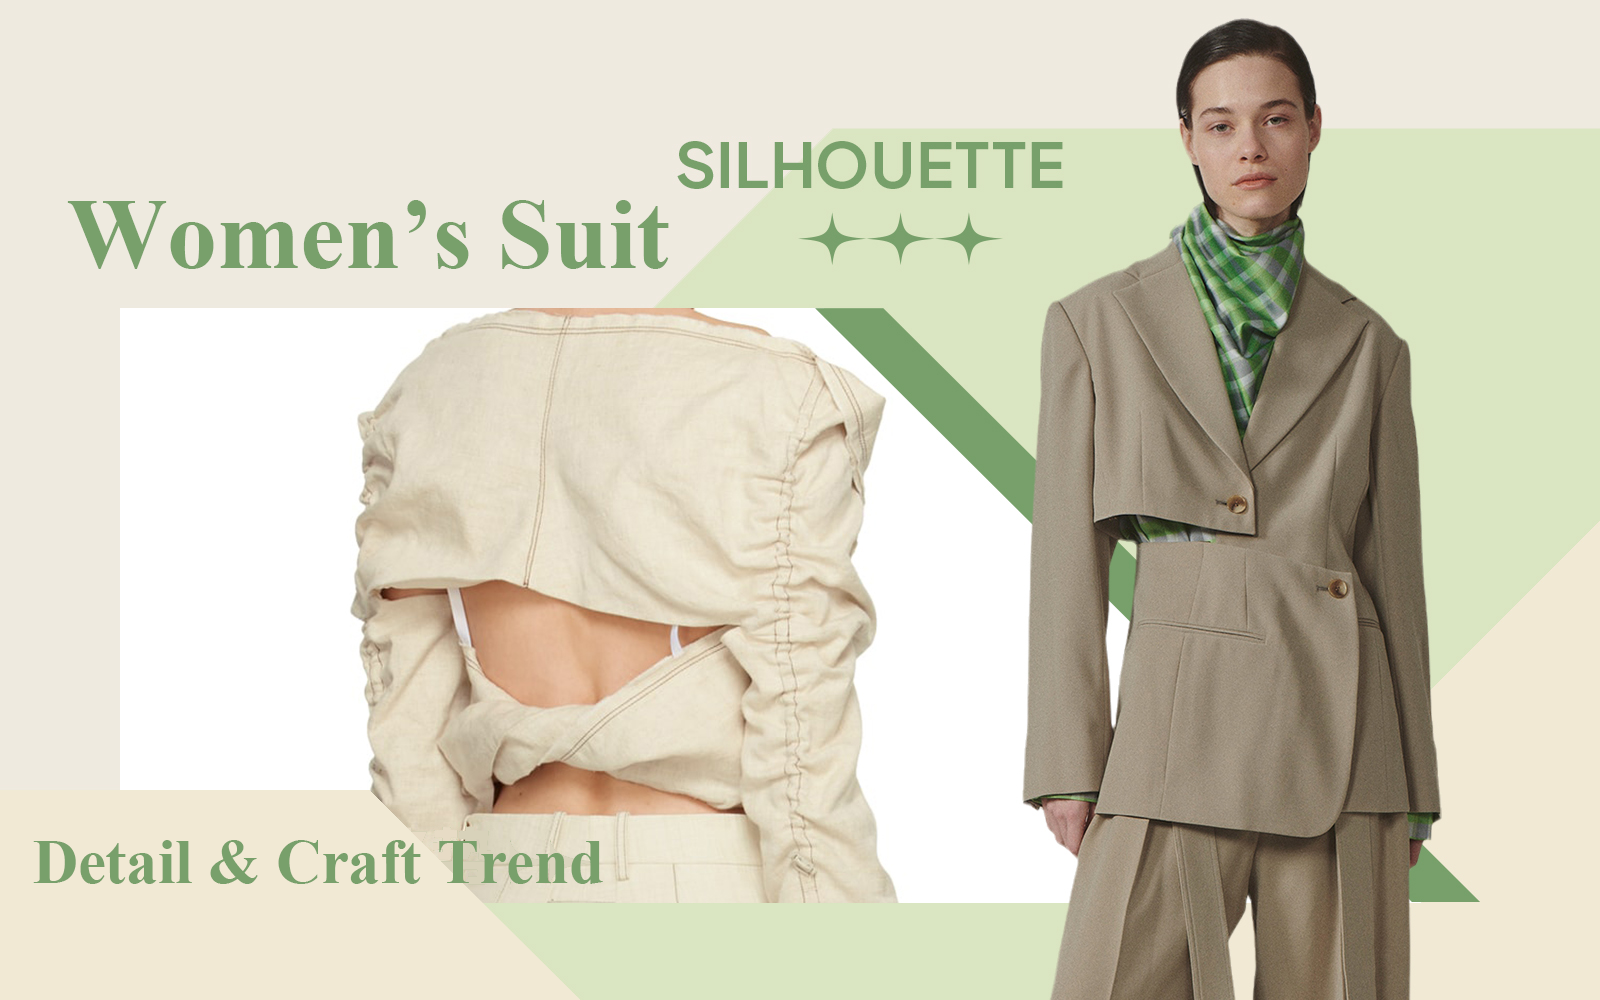 The Detail & Craft Trend for Women's Suit